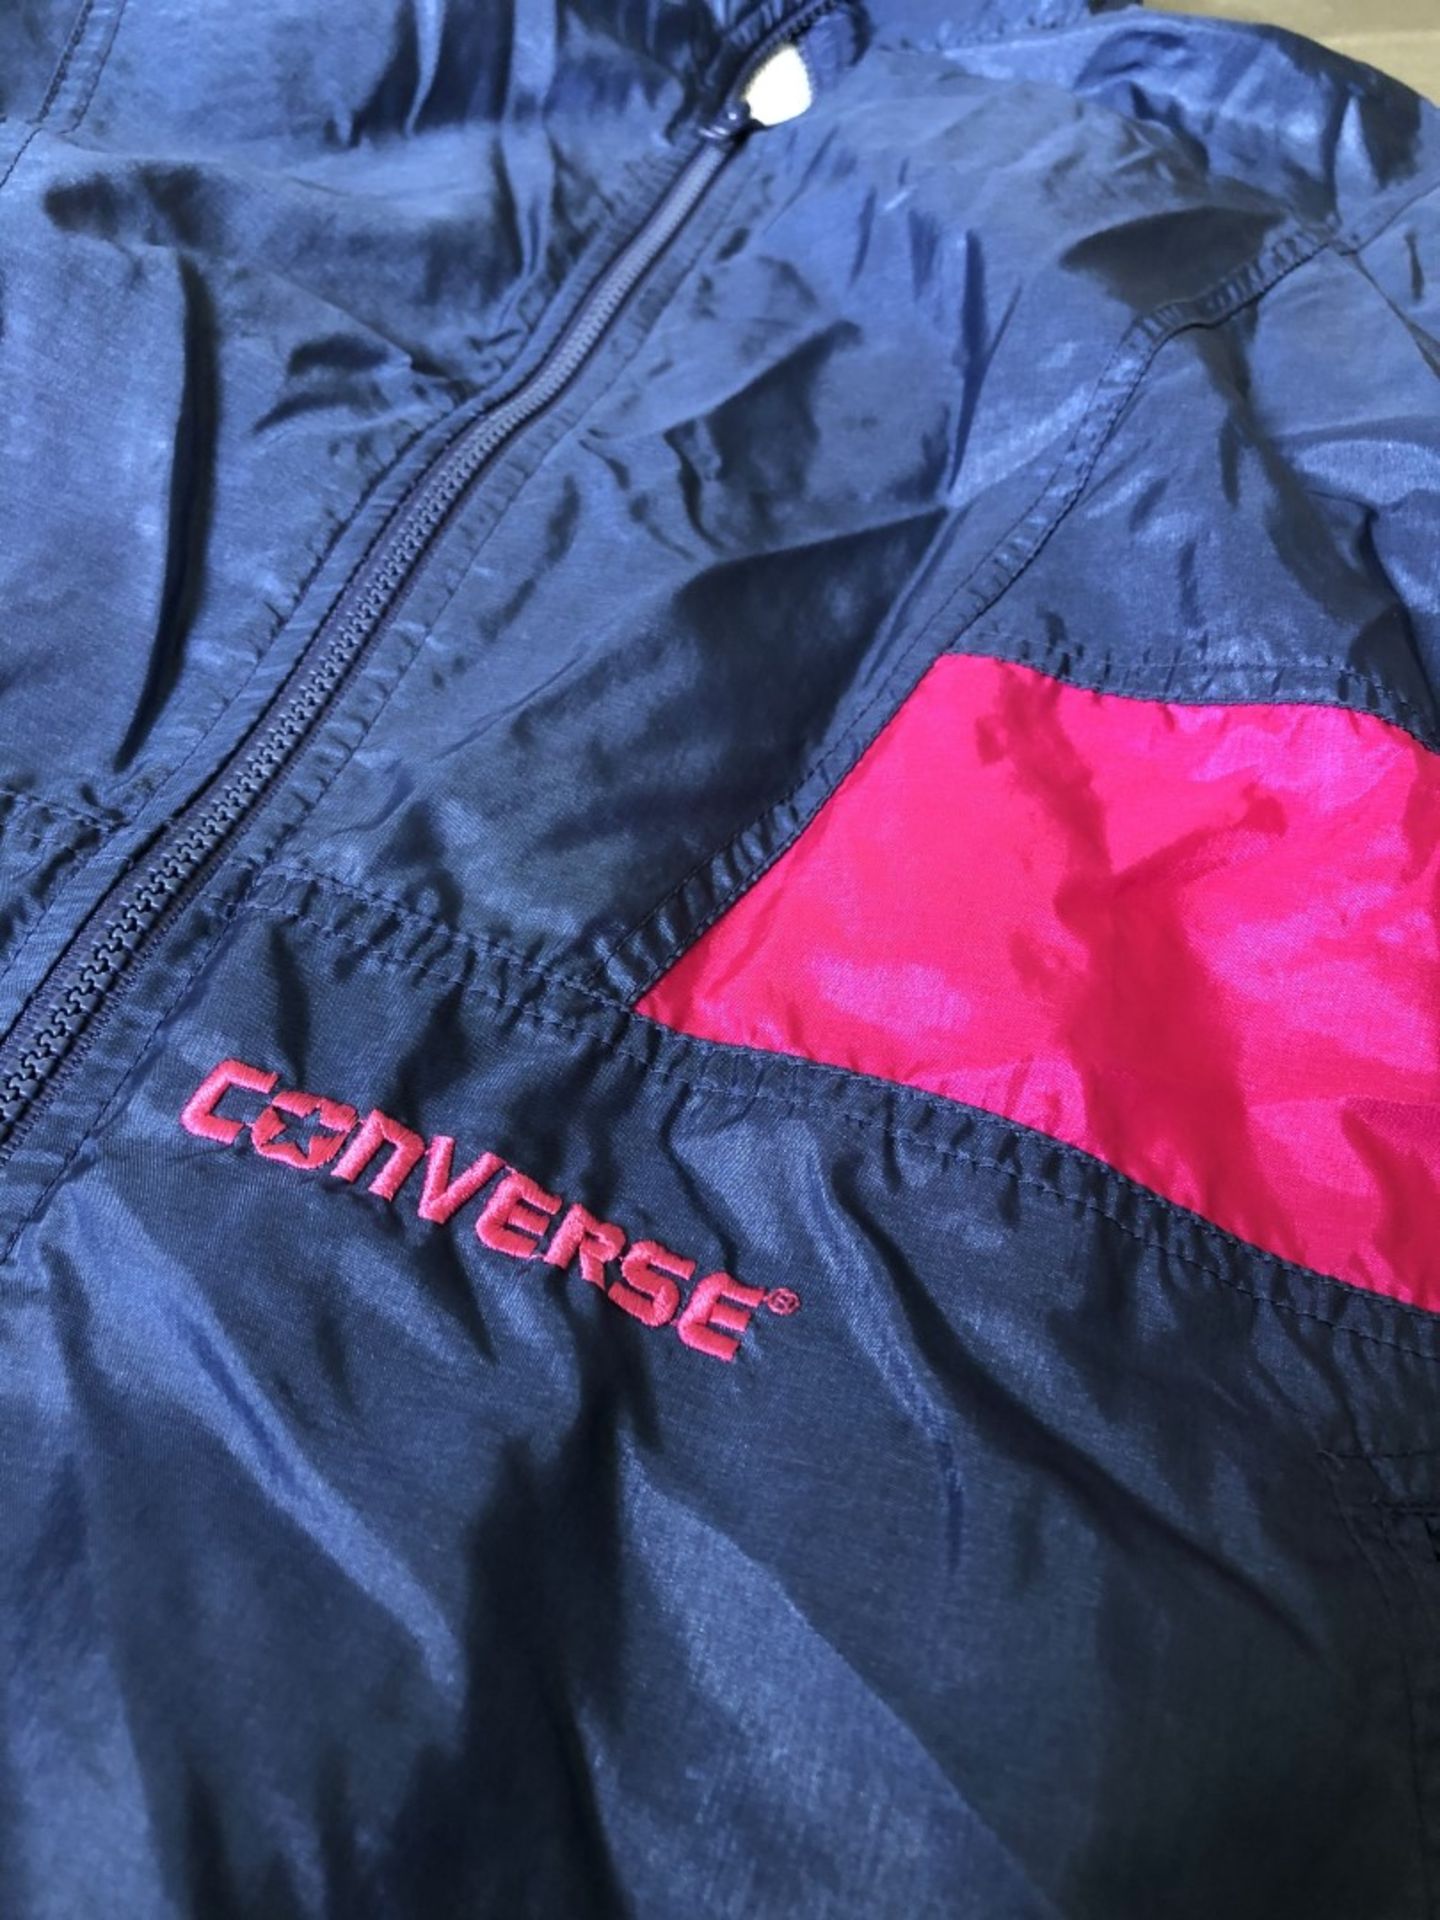 1 x Men's Genuine Vintage Converse Tracksuit In Blue/Pink - Size: Medium - Preowned - Ref: JS112 - - Image 4 of 12